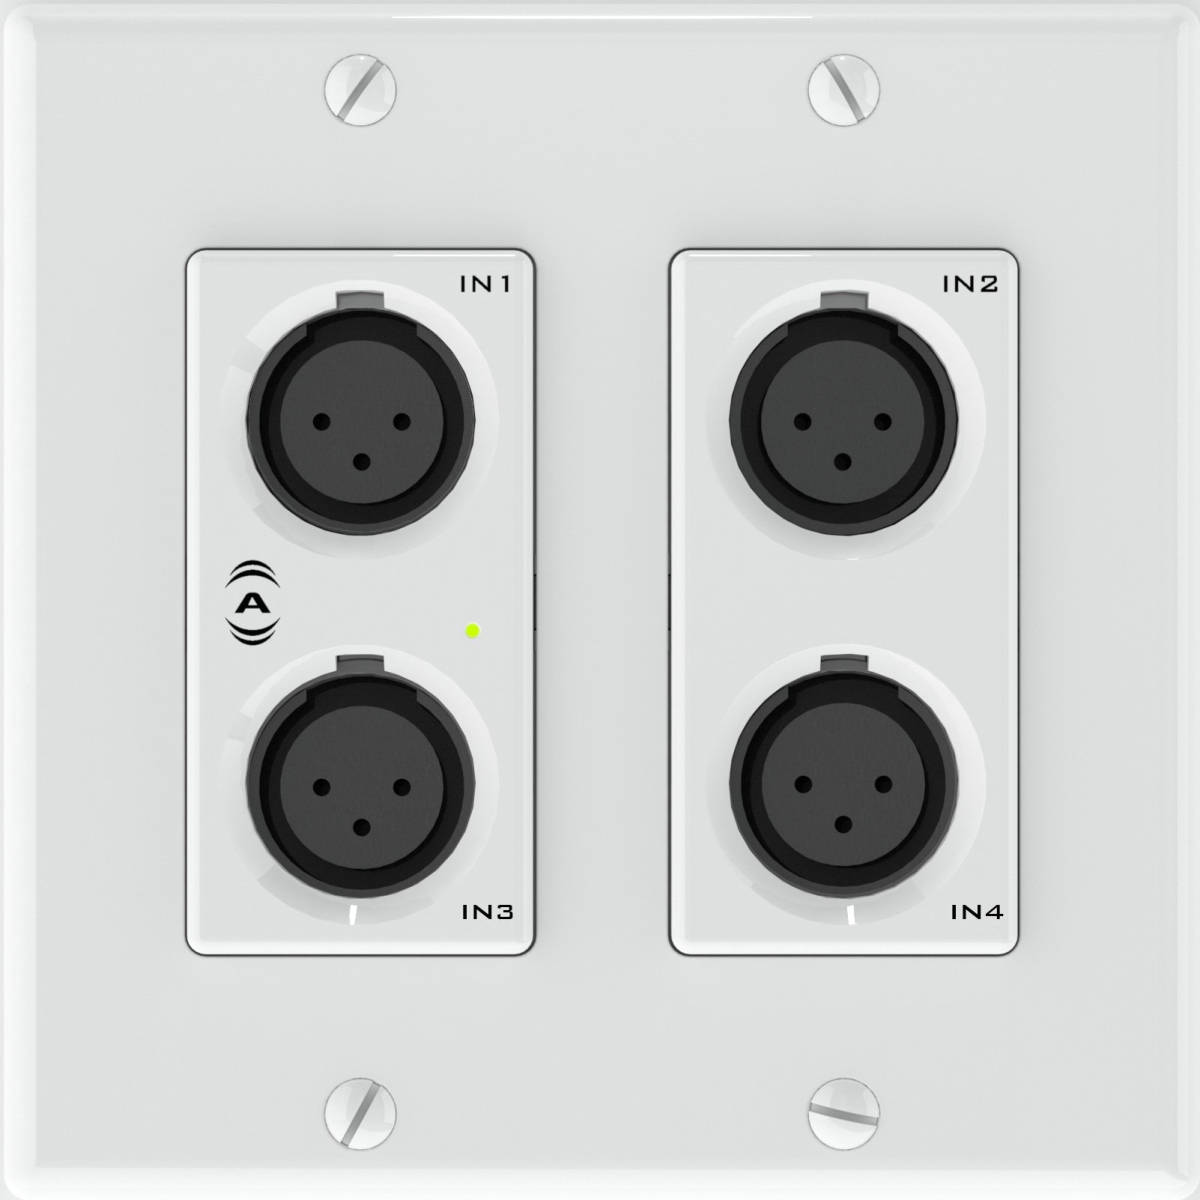 Attero Tech Atec-undx4i-c 4 Mic & Line In Xlr 4x2 Channel 2 Gang Us Wall Plate With Phoenix Input & Output, Poe - White & Black Inserts